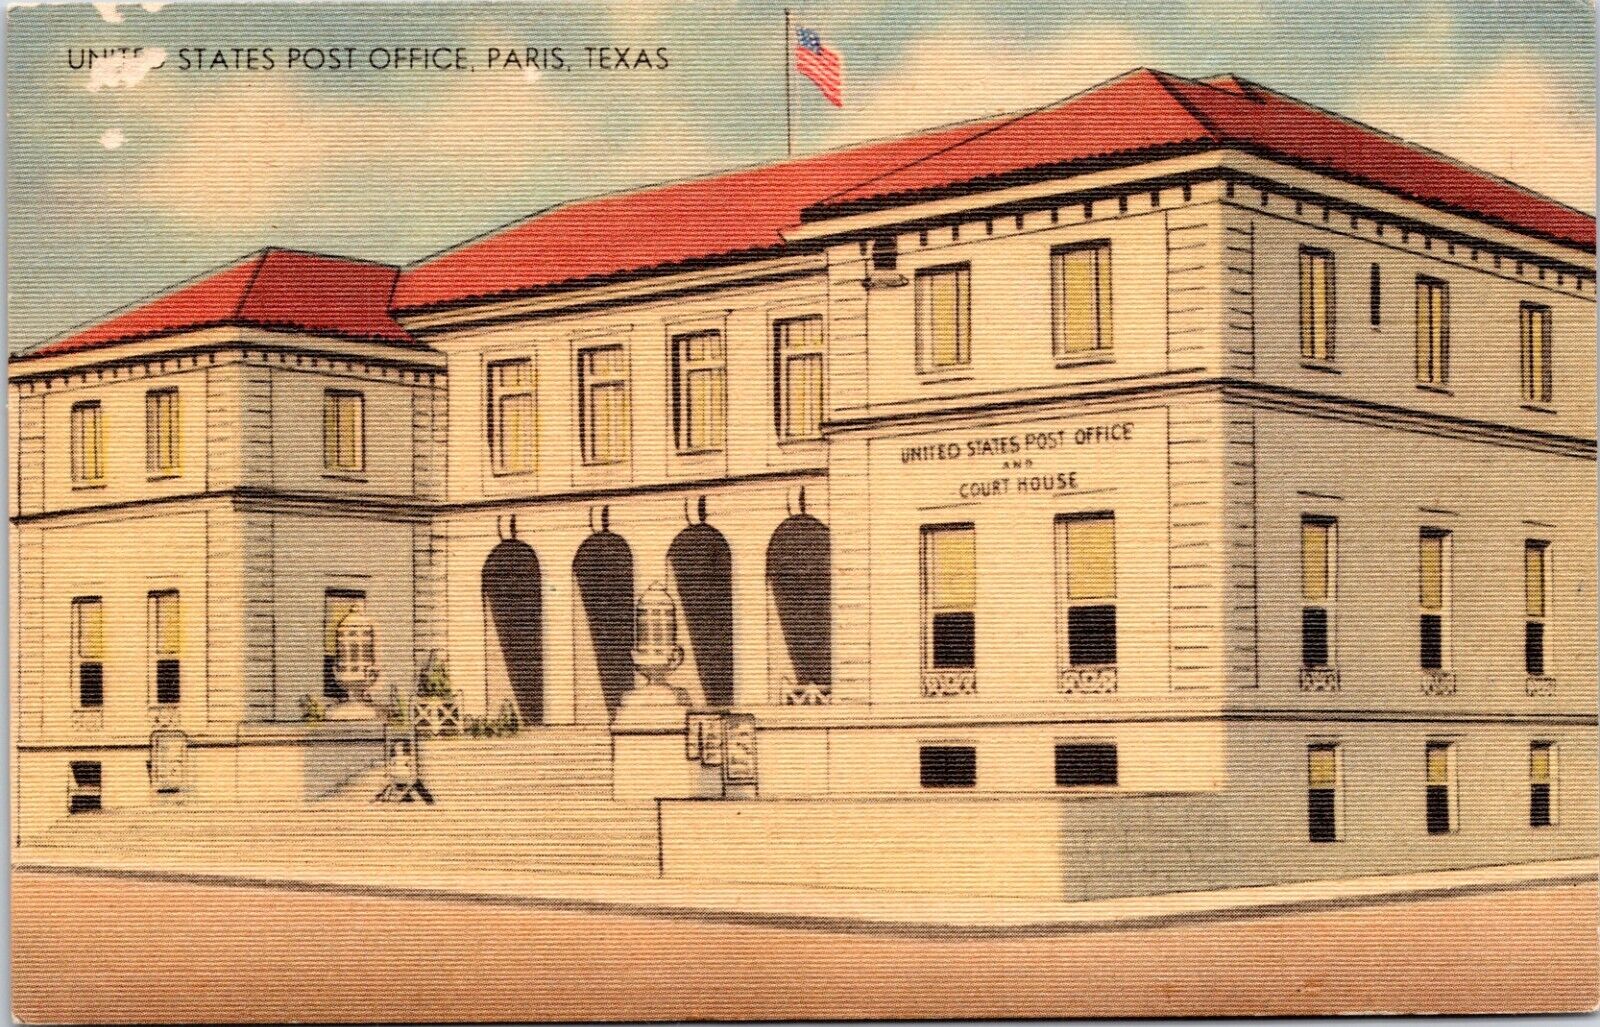 c1930 Paris, TX, United States Post Office and Court House, linen